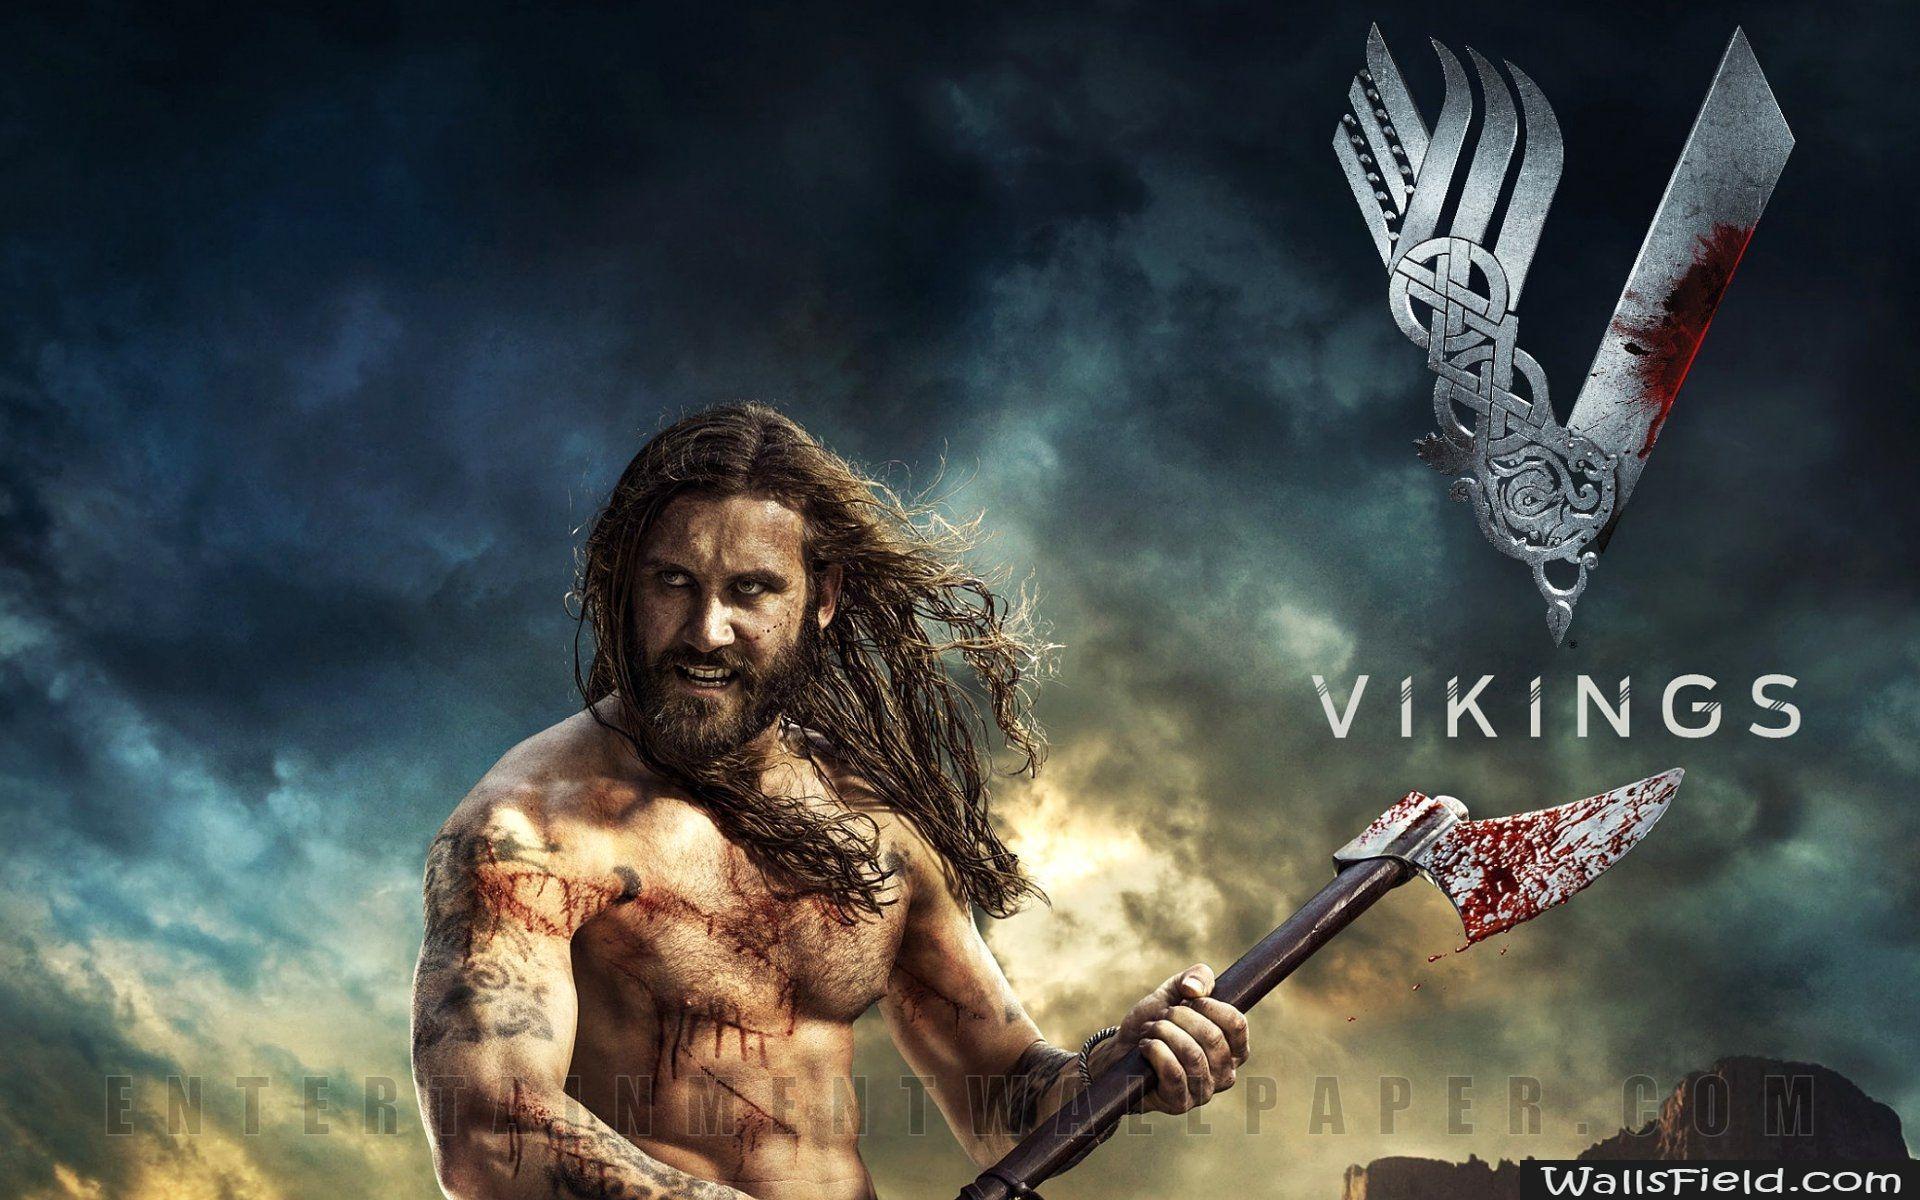 You can view, download and comment on Vikings Wallpaper free HD